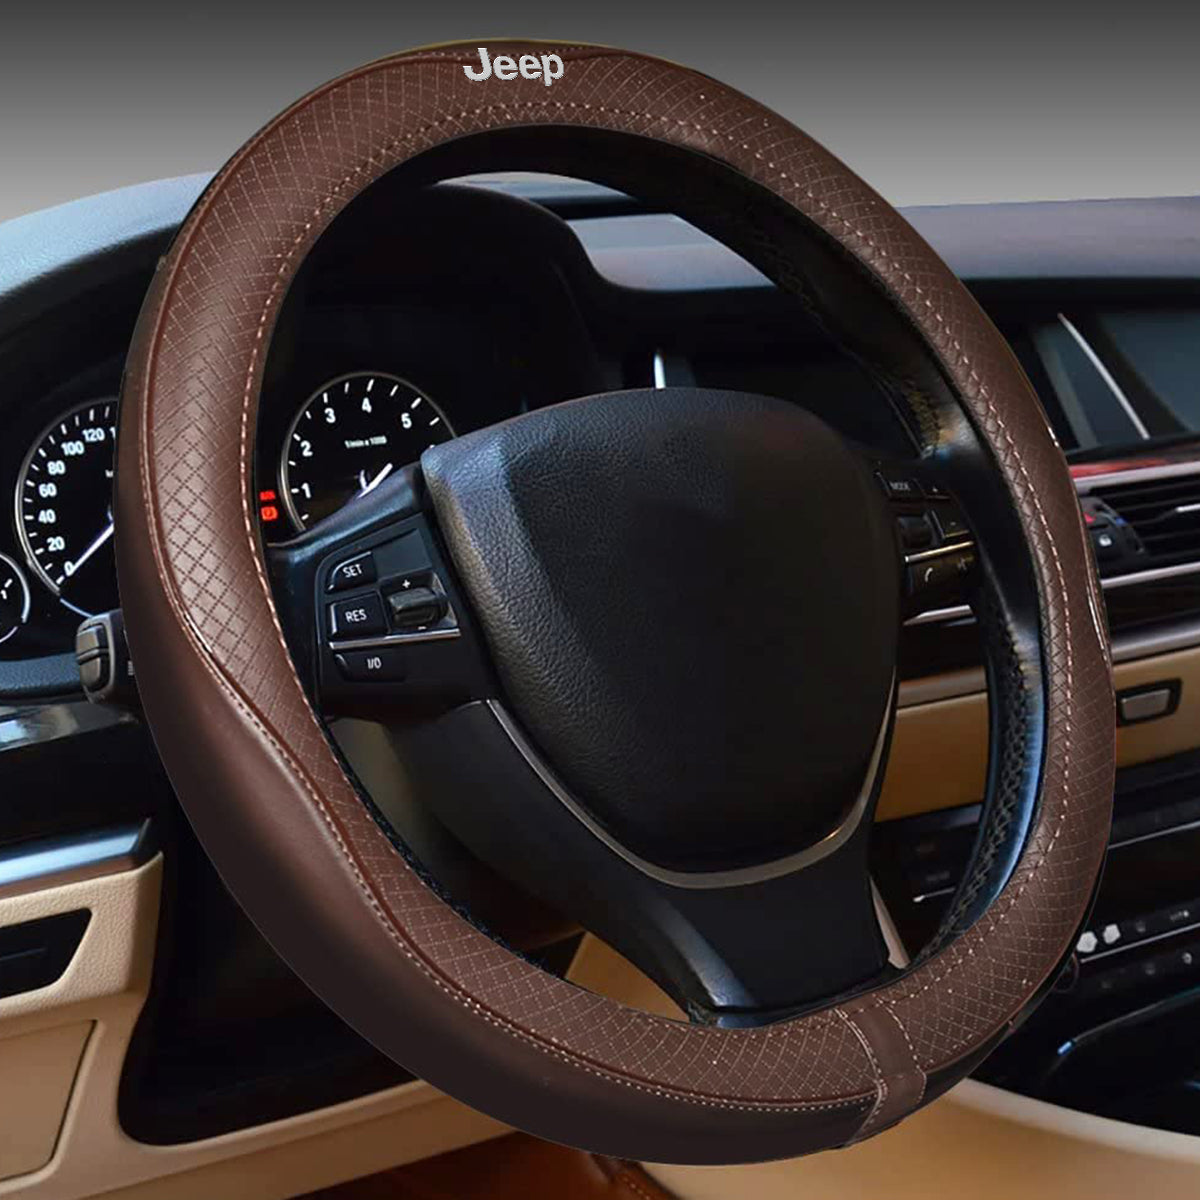 Car Steering Wheel Cover, Custom For Your Cars, Anti-Slip, Safety, Soft, Breathable, Heavy Duty, Thick, Full Surround, Sports Style, Car Accessories JE18990